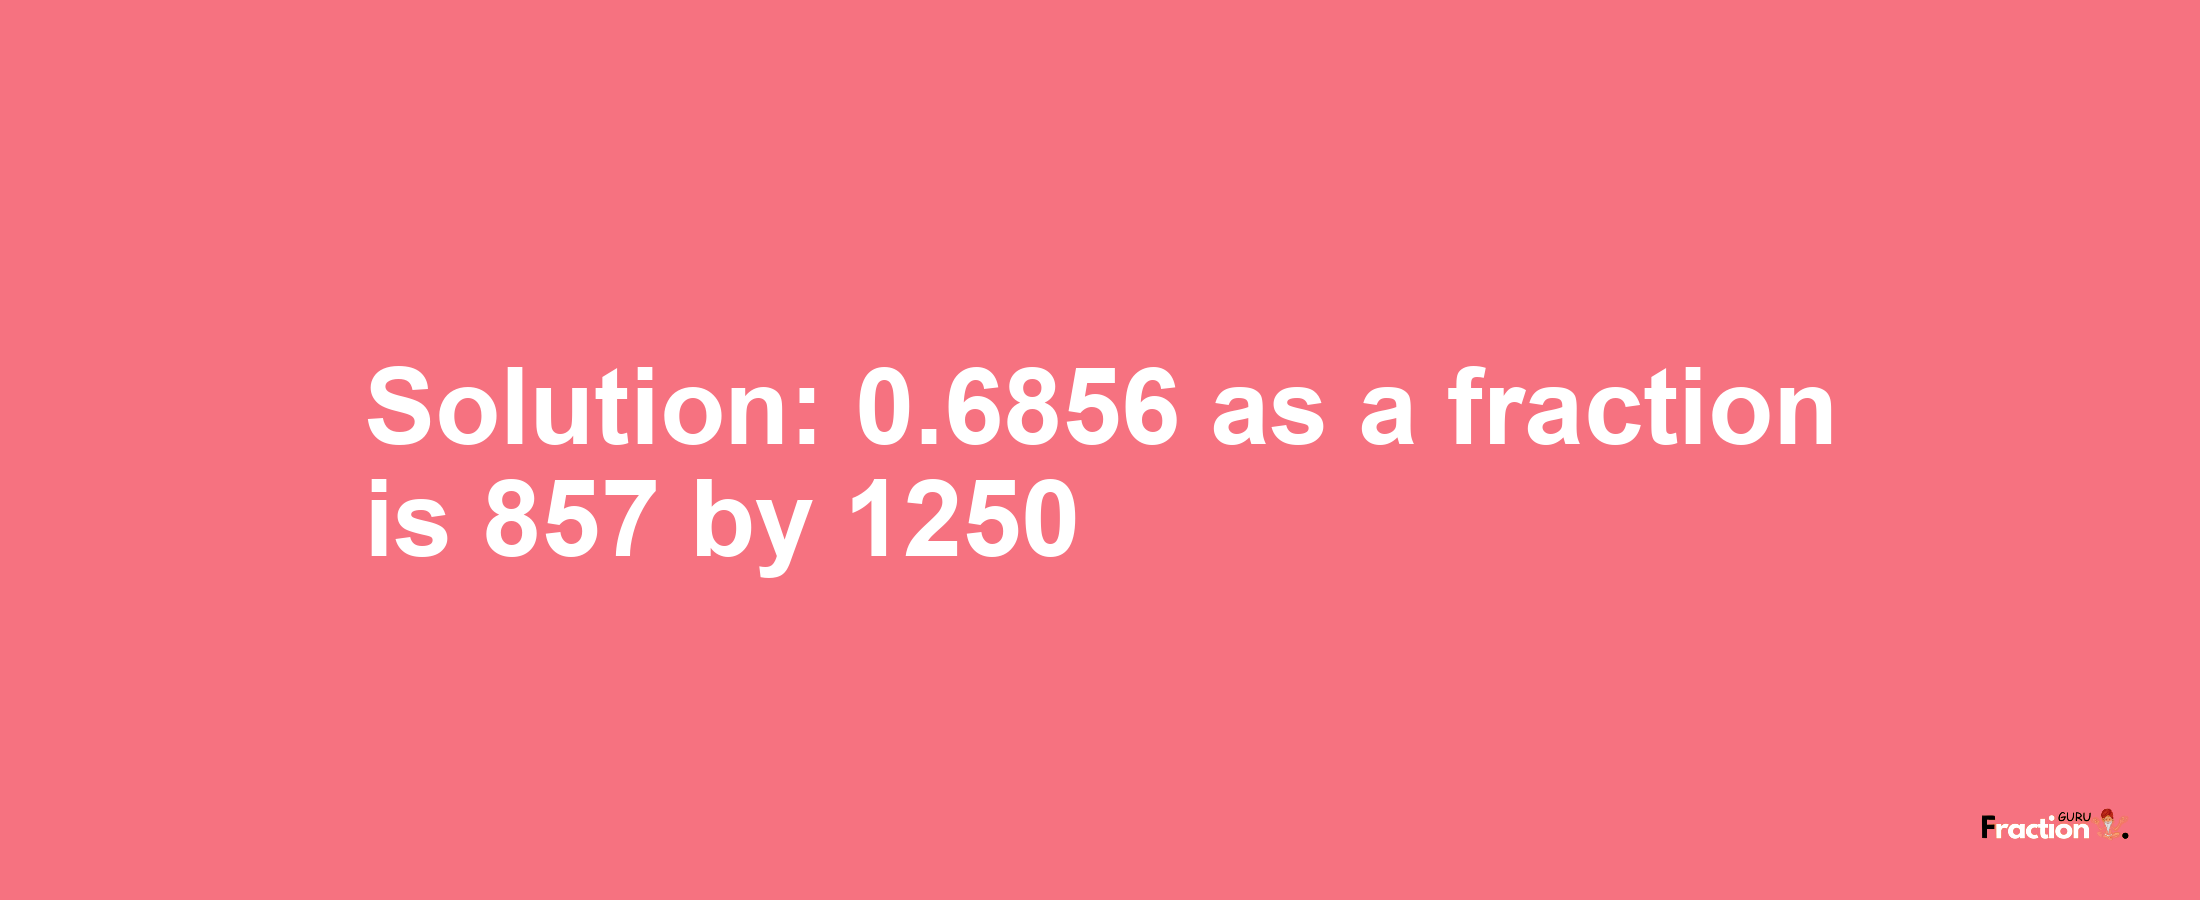 Solution:0.6856 as a fraction is 857/1250